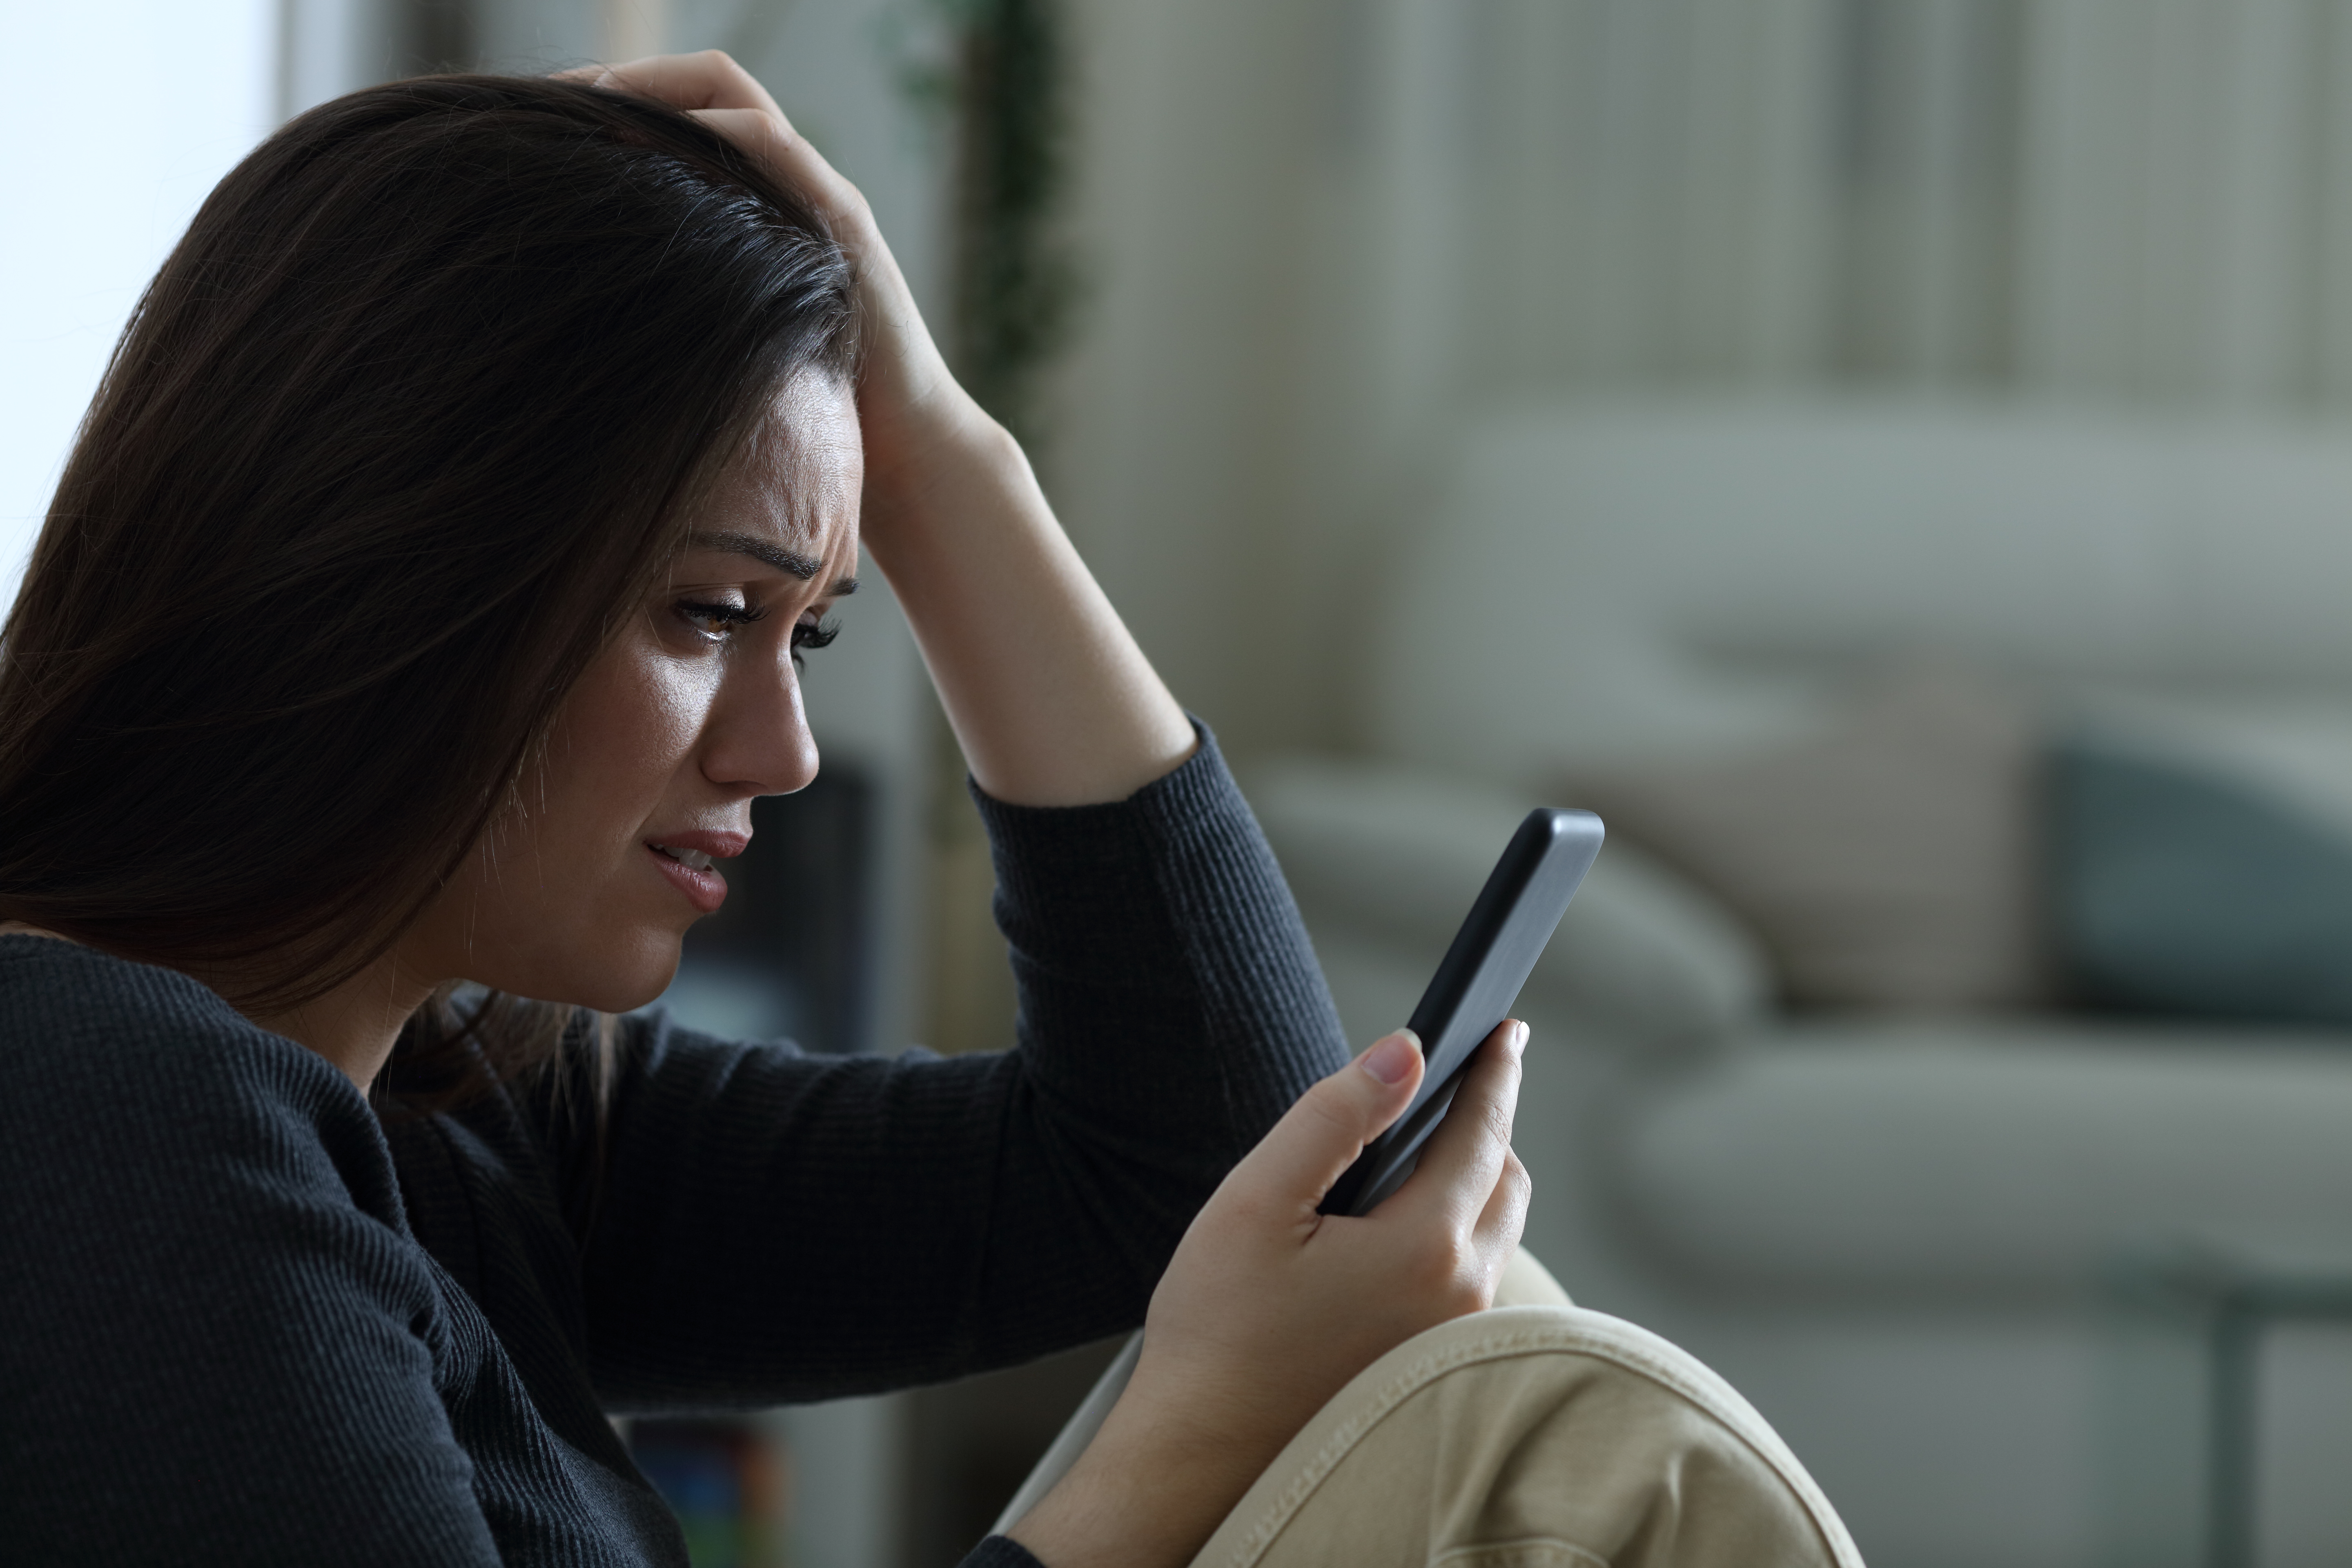 A woman sad while looking at her phone | Source: Shutterstock